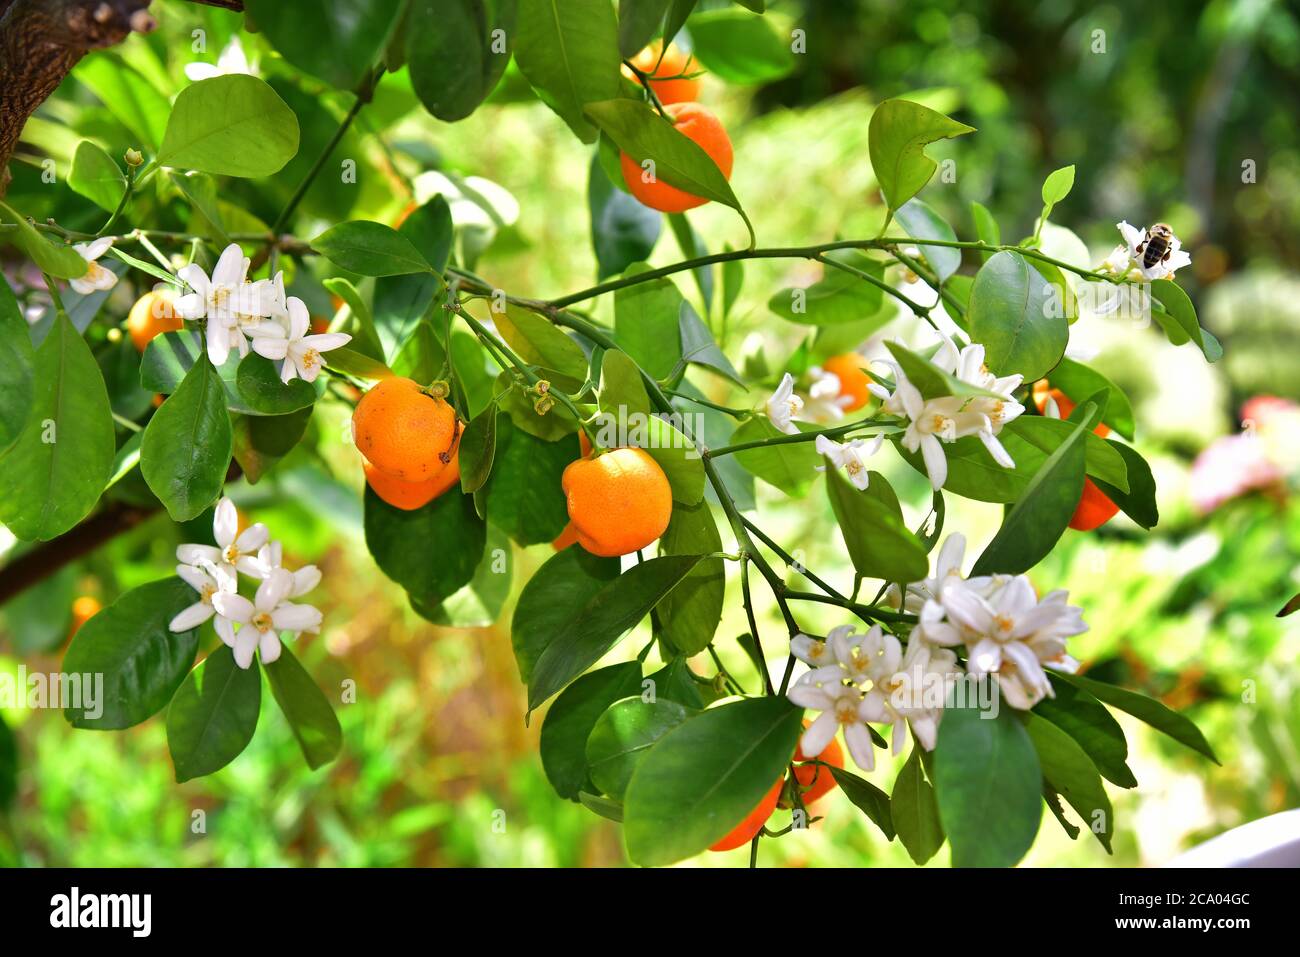 Tangerine (Citrus reticulata) with flowers and fruits Stock Photo